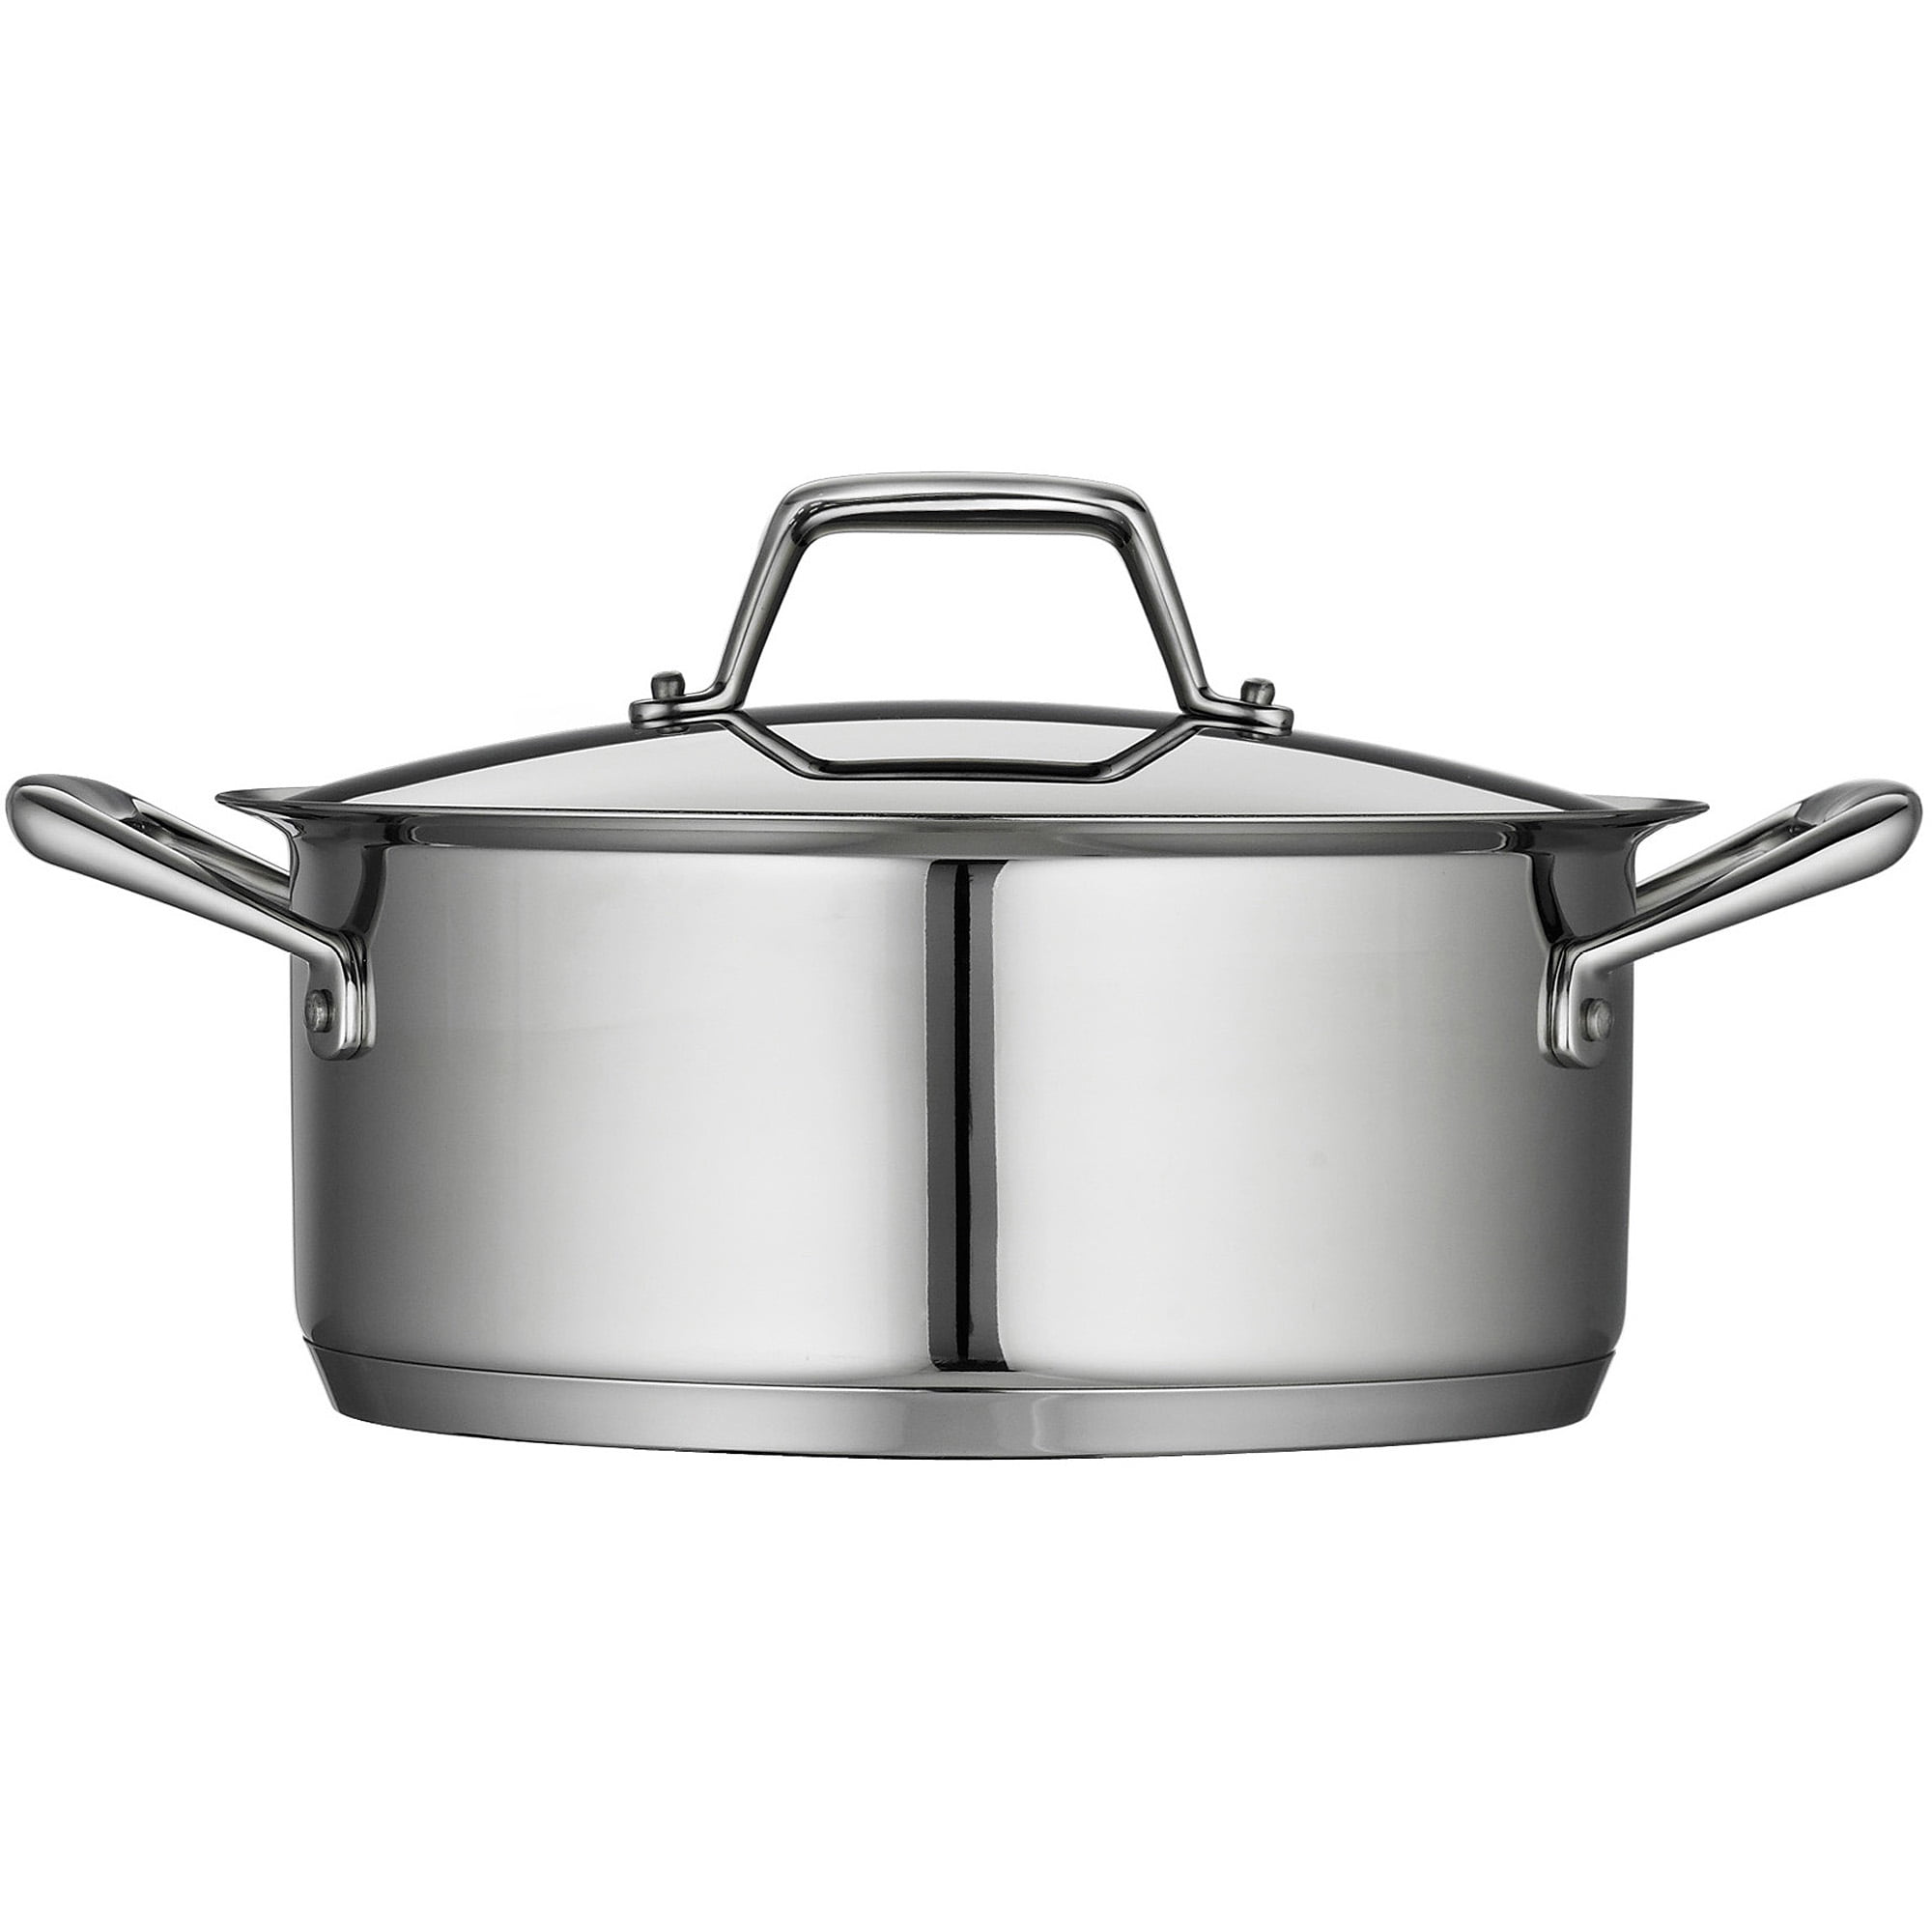 Tramontina Gourmet Prima 5-Quart Covered Dutch Oven with Tri-Ply Base